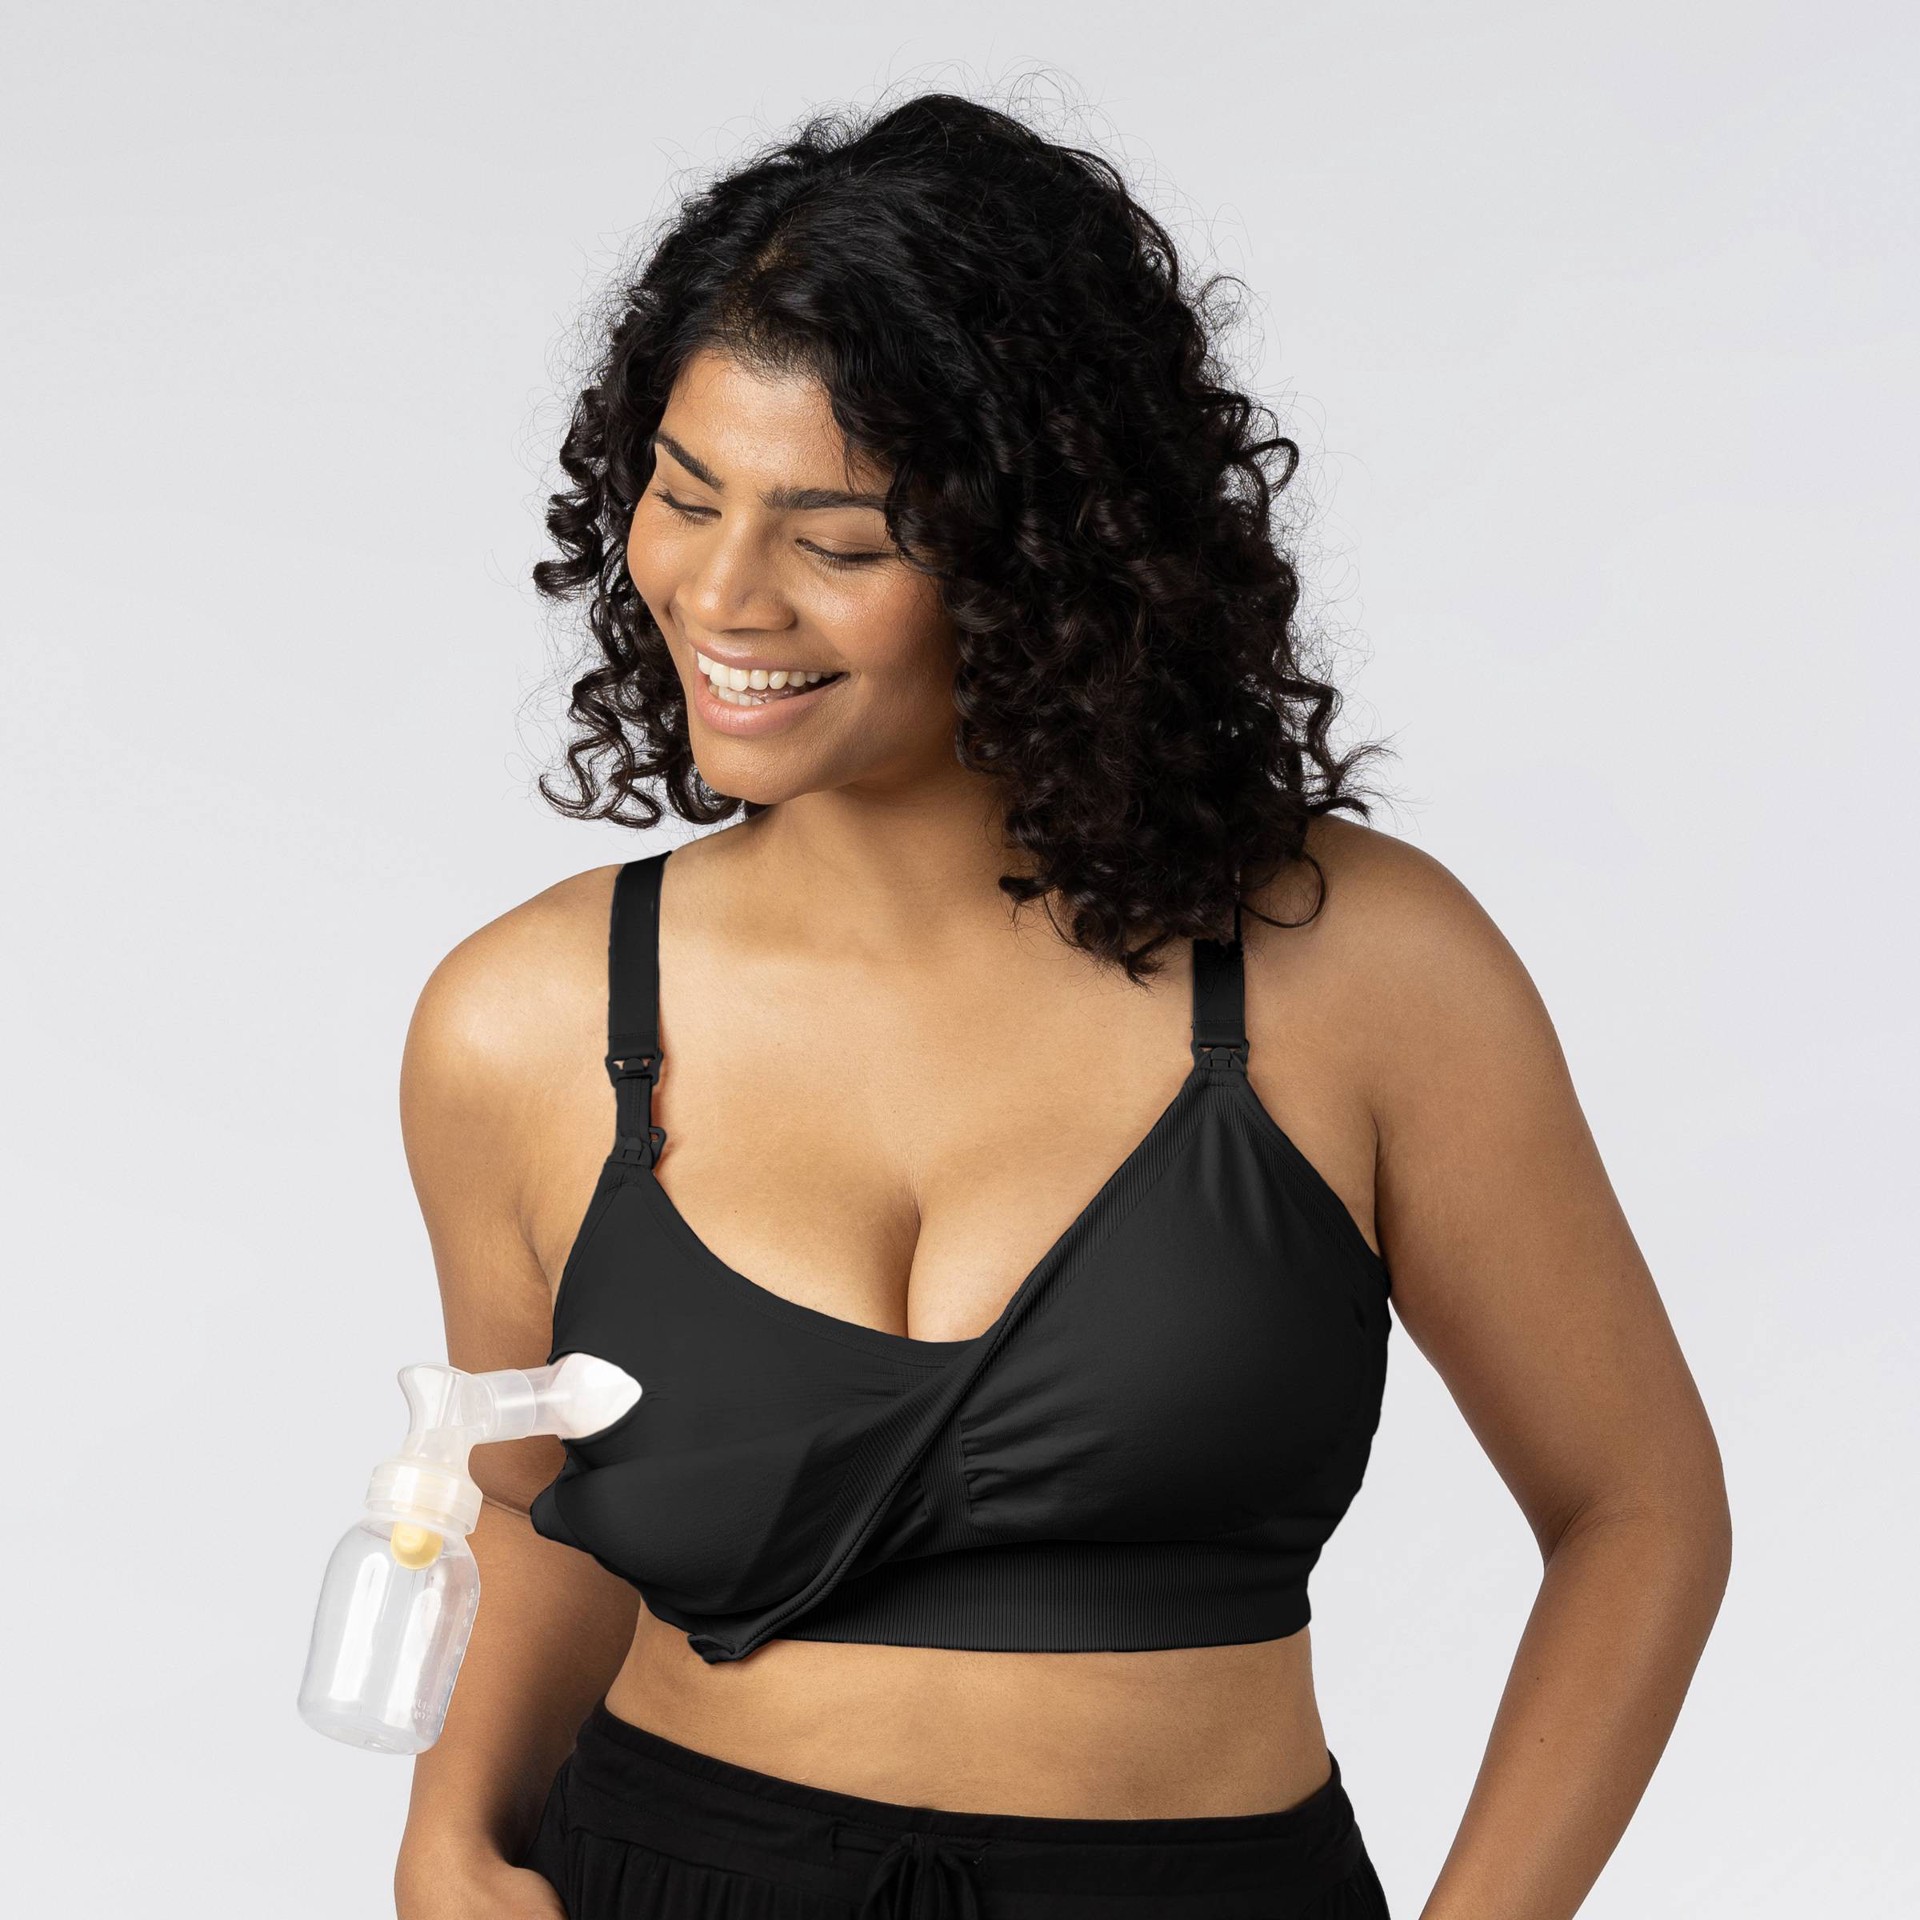 kindred by Kindred Bravely Women's Pumping + Nursing Hands Free Bra - Black  S-Busty 1 ct